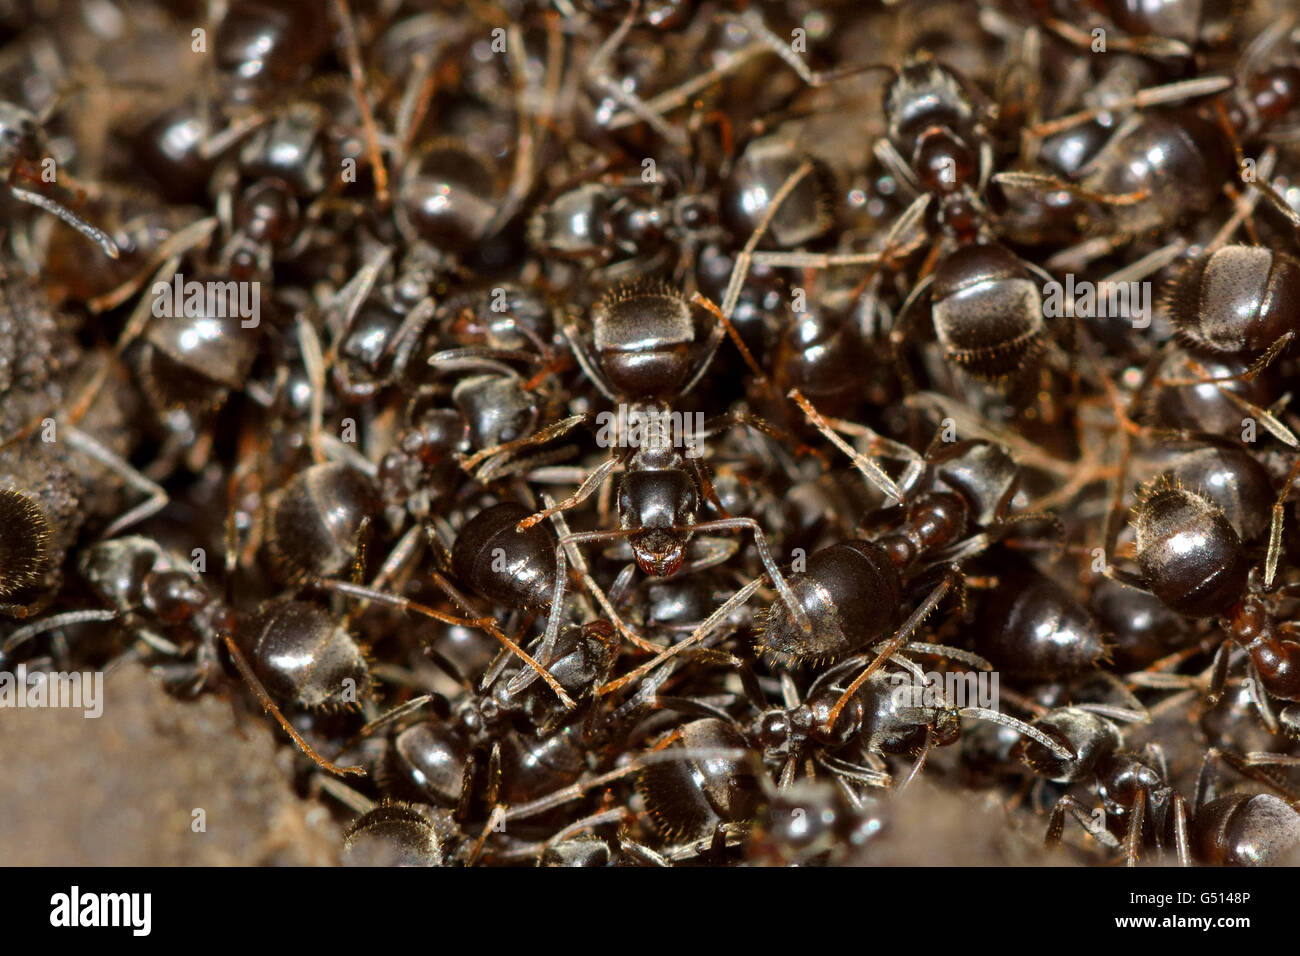 Common black ants (Lasius niger) in nest. Lots of worker ants in nest adopting defensive behaviours after being exposed Stock Photo